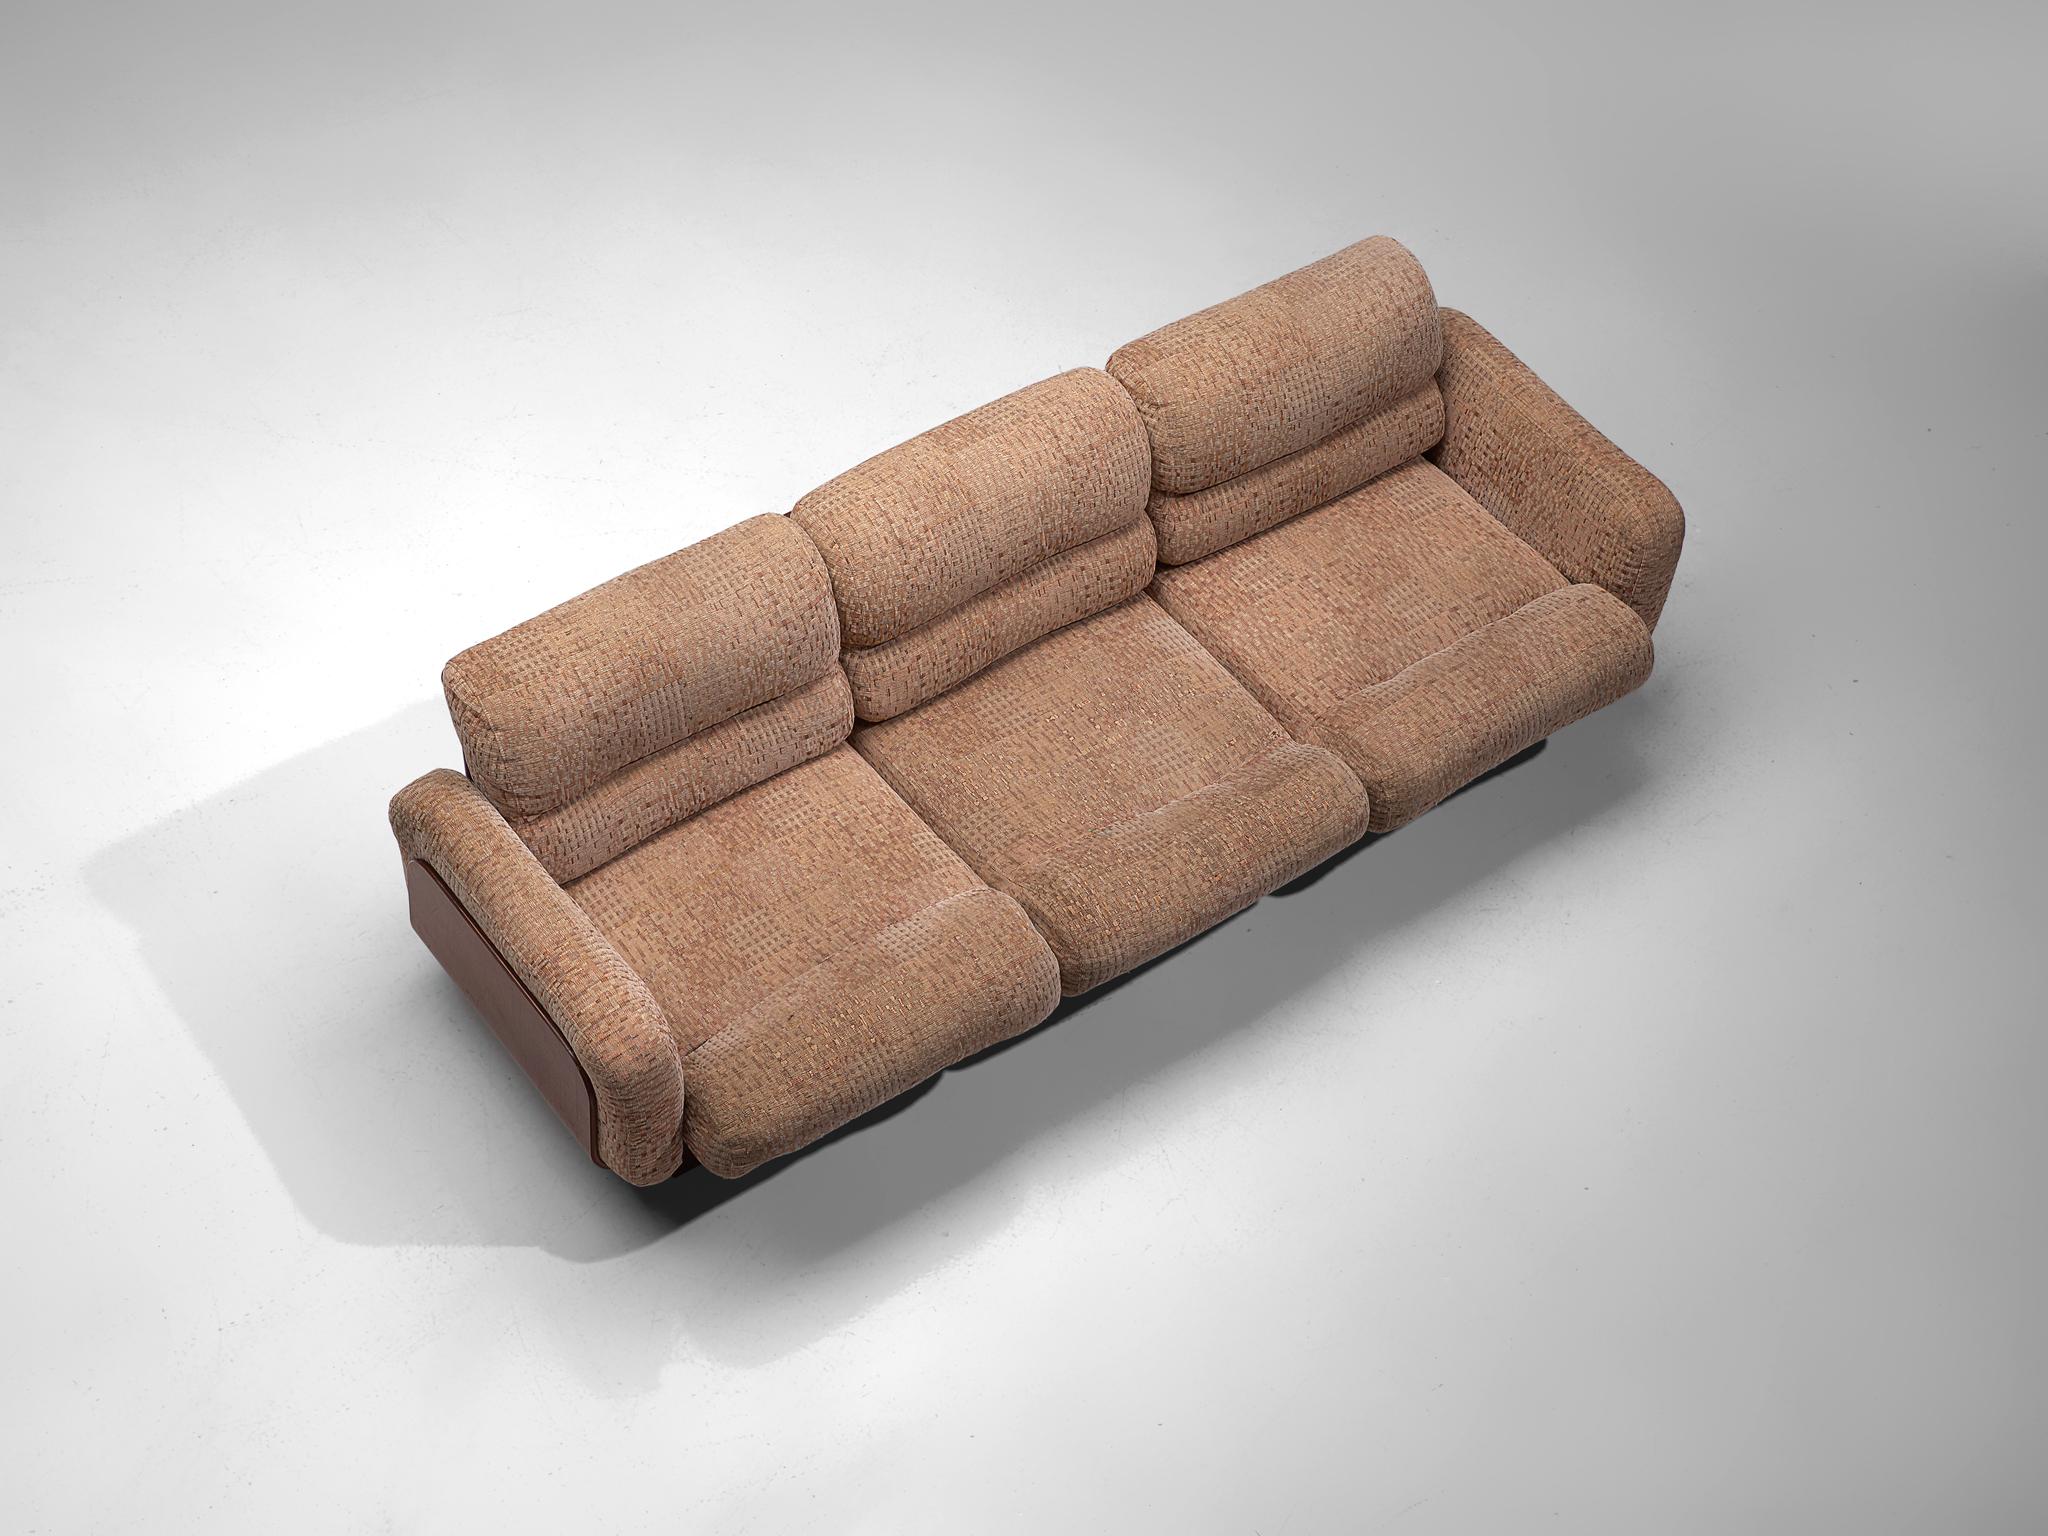 Mid-20th Century Finnish Sofa in Birch and Patterned Beige Upholstery  For Sale